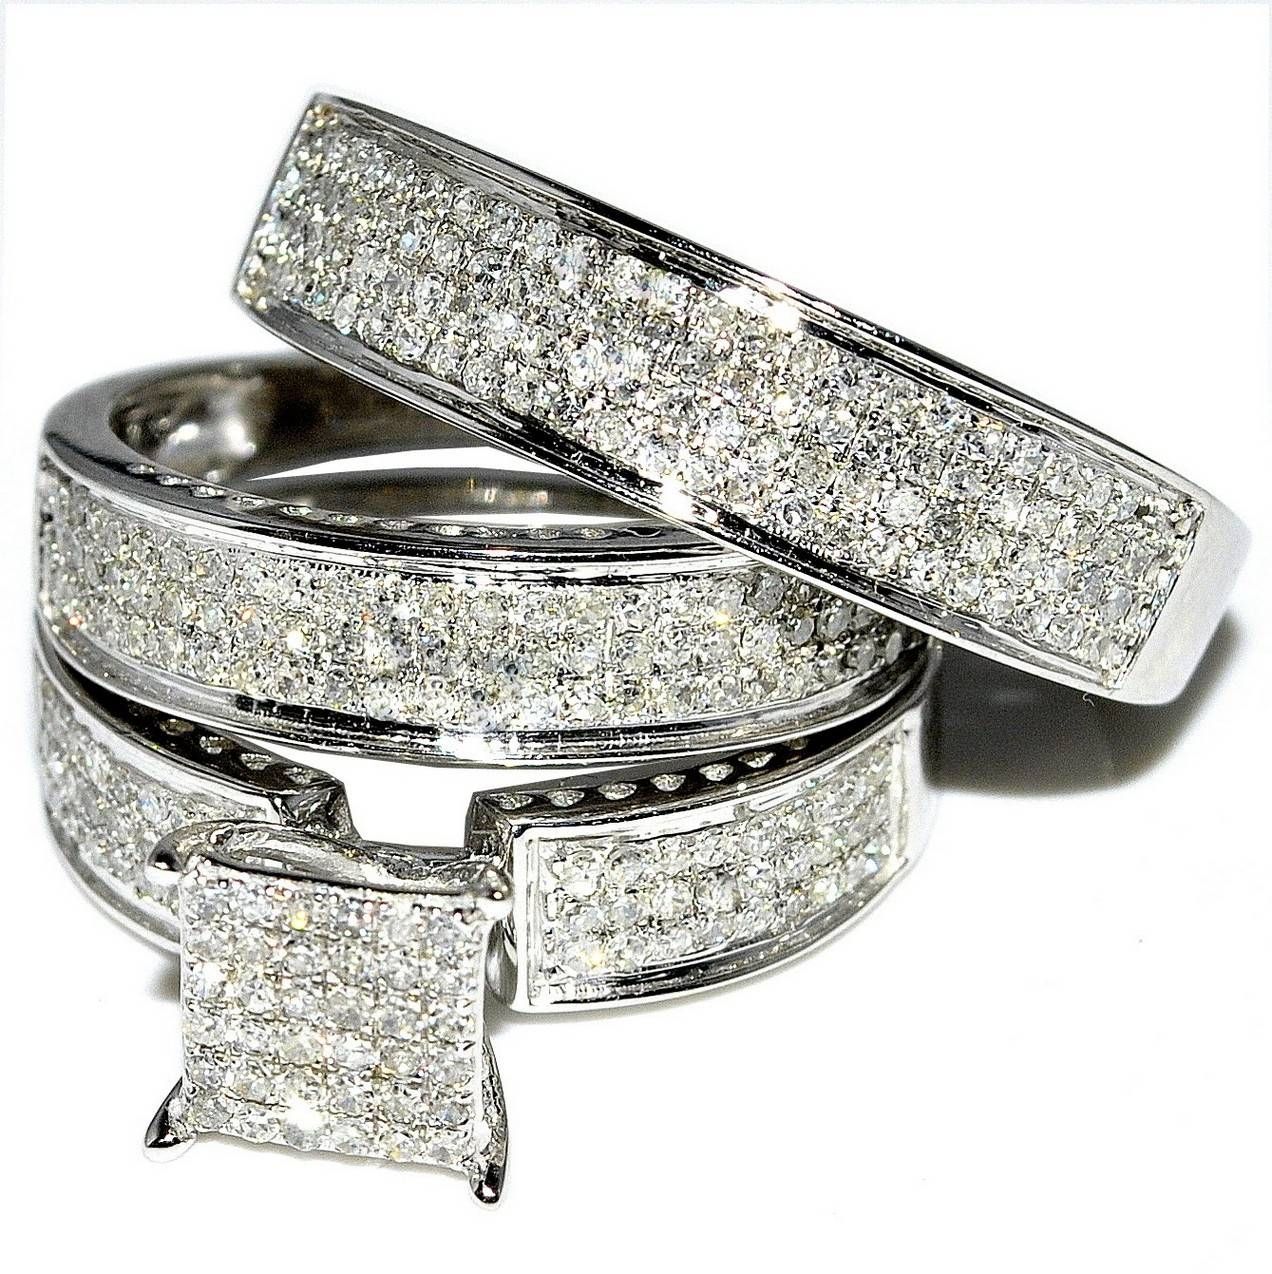 Brilliant Ideas His And Her Wedding Ring Set Wedding Rings Sets Within Wedding Bands Sets For Him And Her (View 14 of 15)